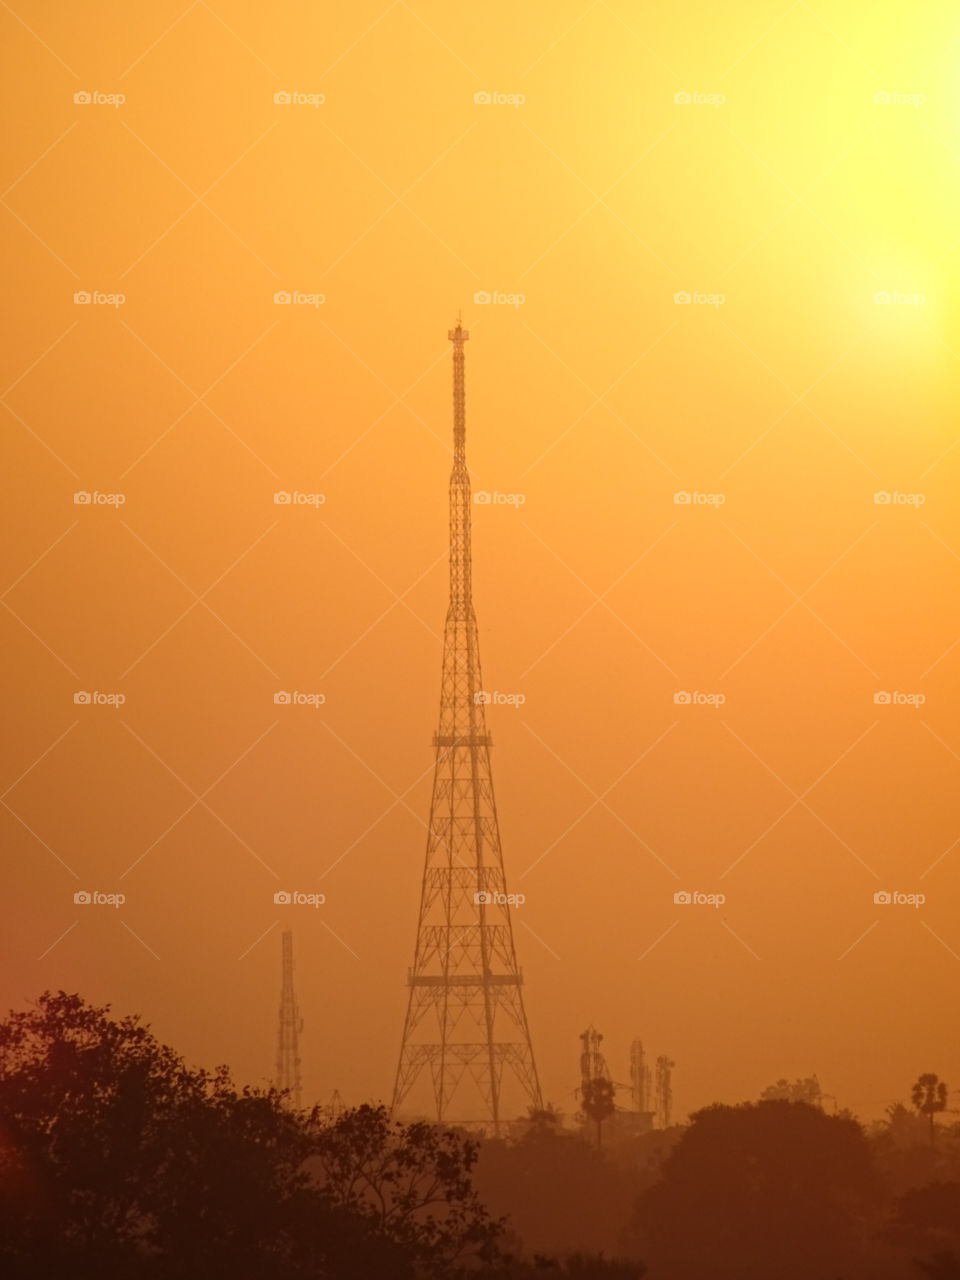 Sunset, No Person, Tower, Sky, Silhouette